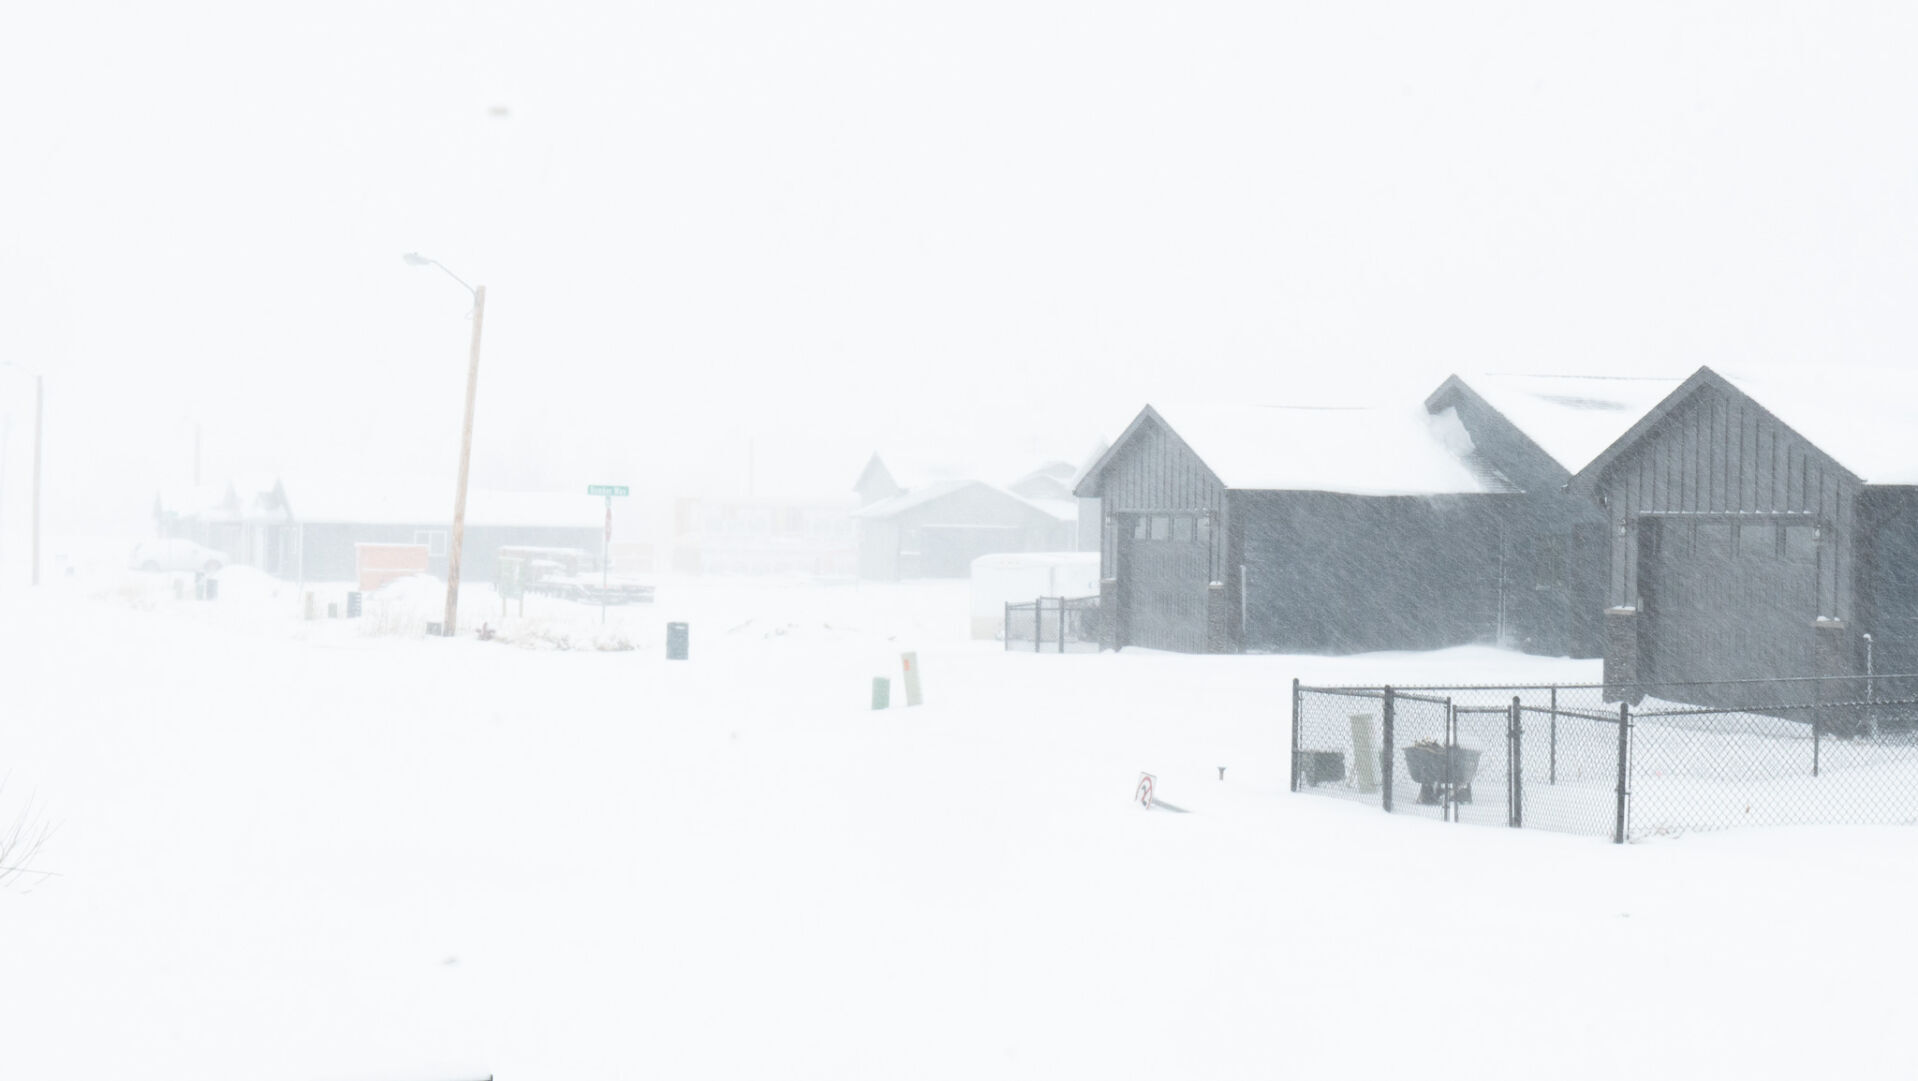 South Dakota sees widespread closures, travel advisories due to winter storm